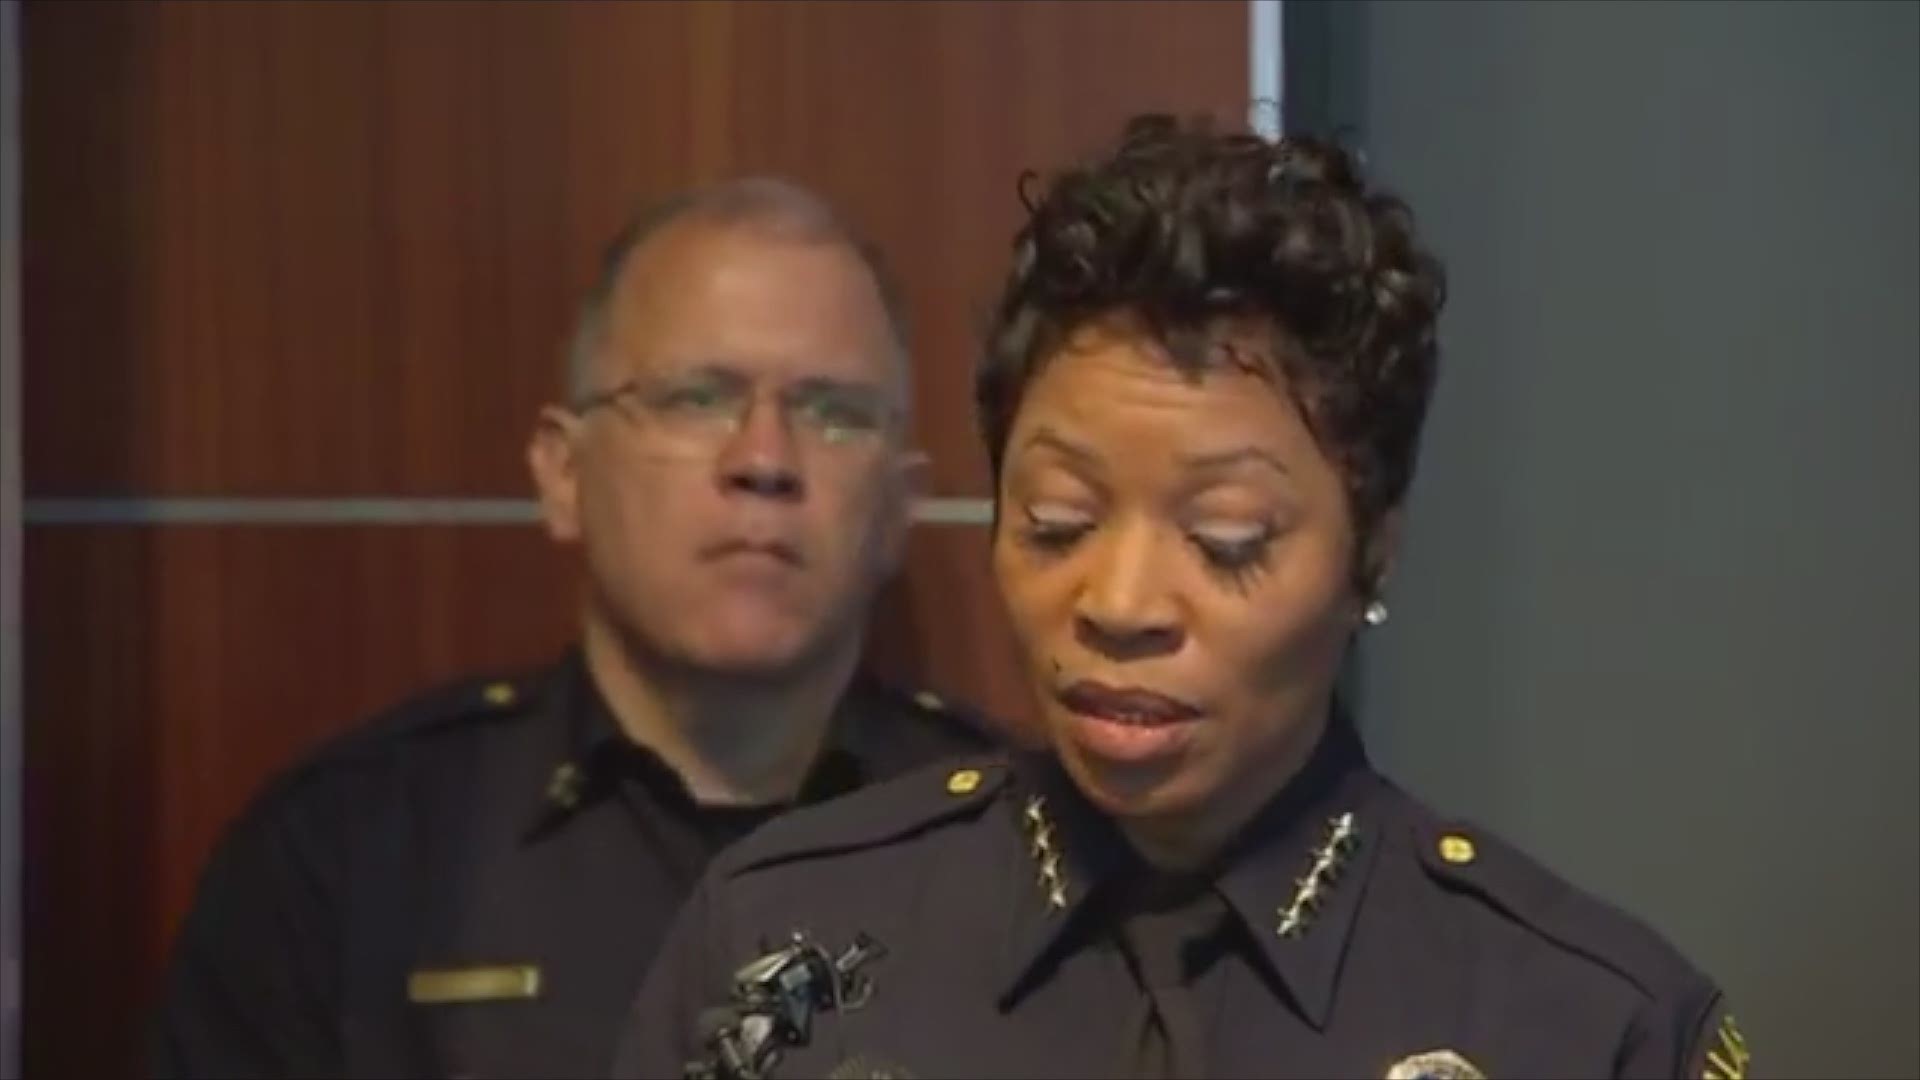 Dallas Police Chief U. Ren�e Hall gives an update after an officer walked into the wrong apartment Thursday night and killed a man inside. WFAA.com